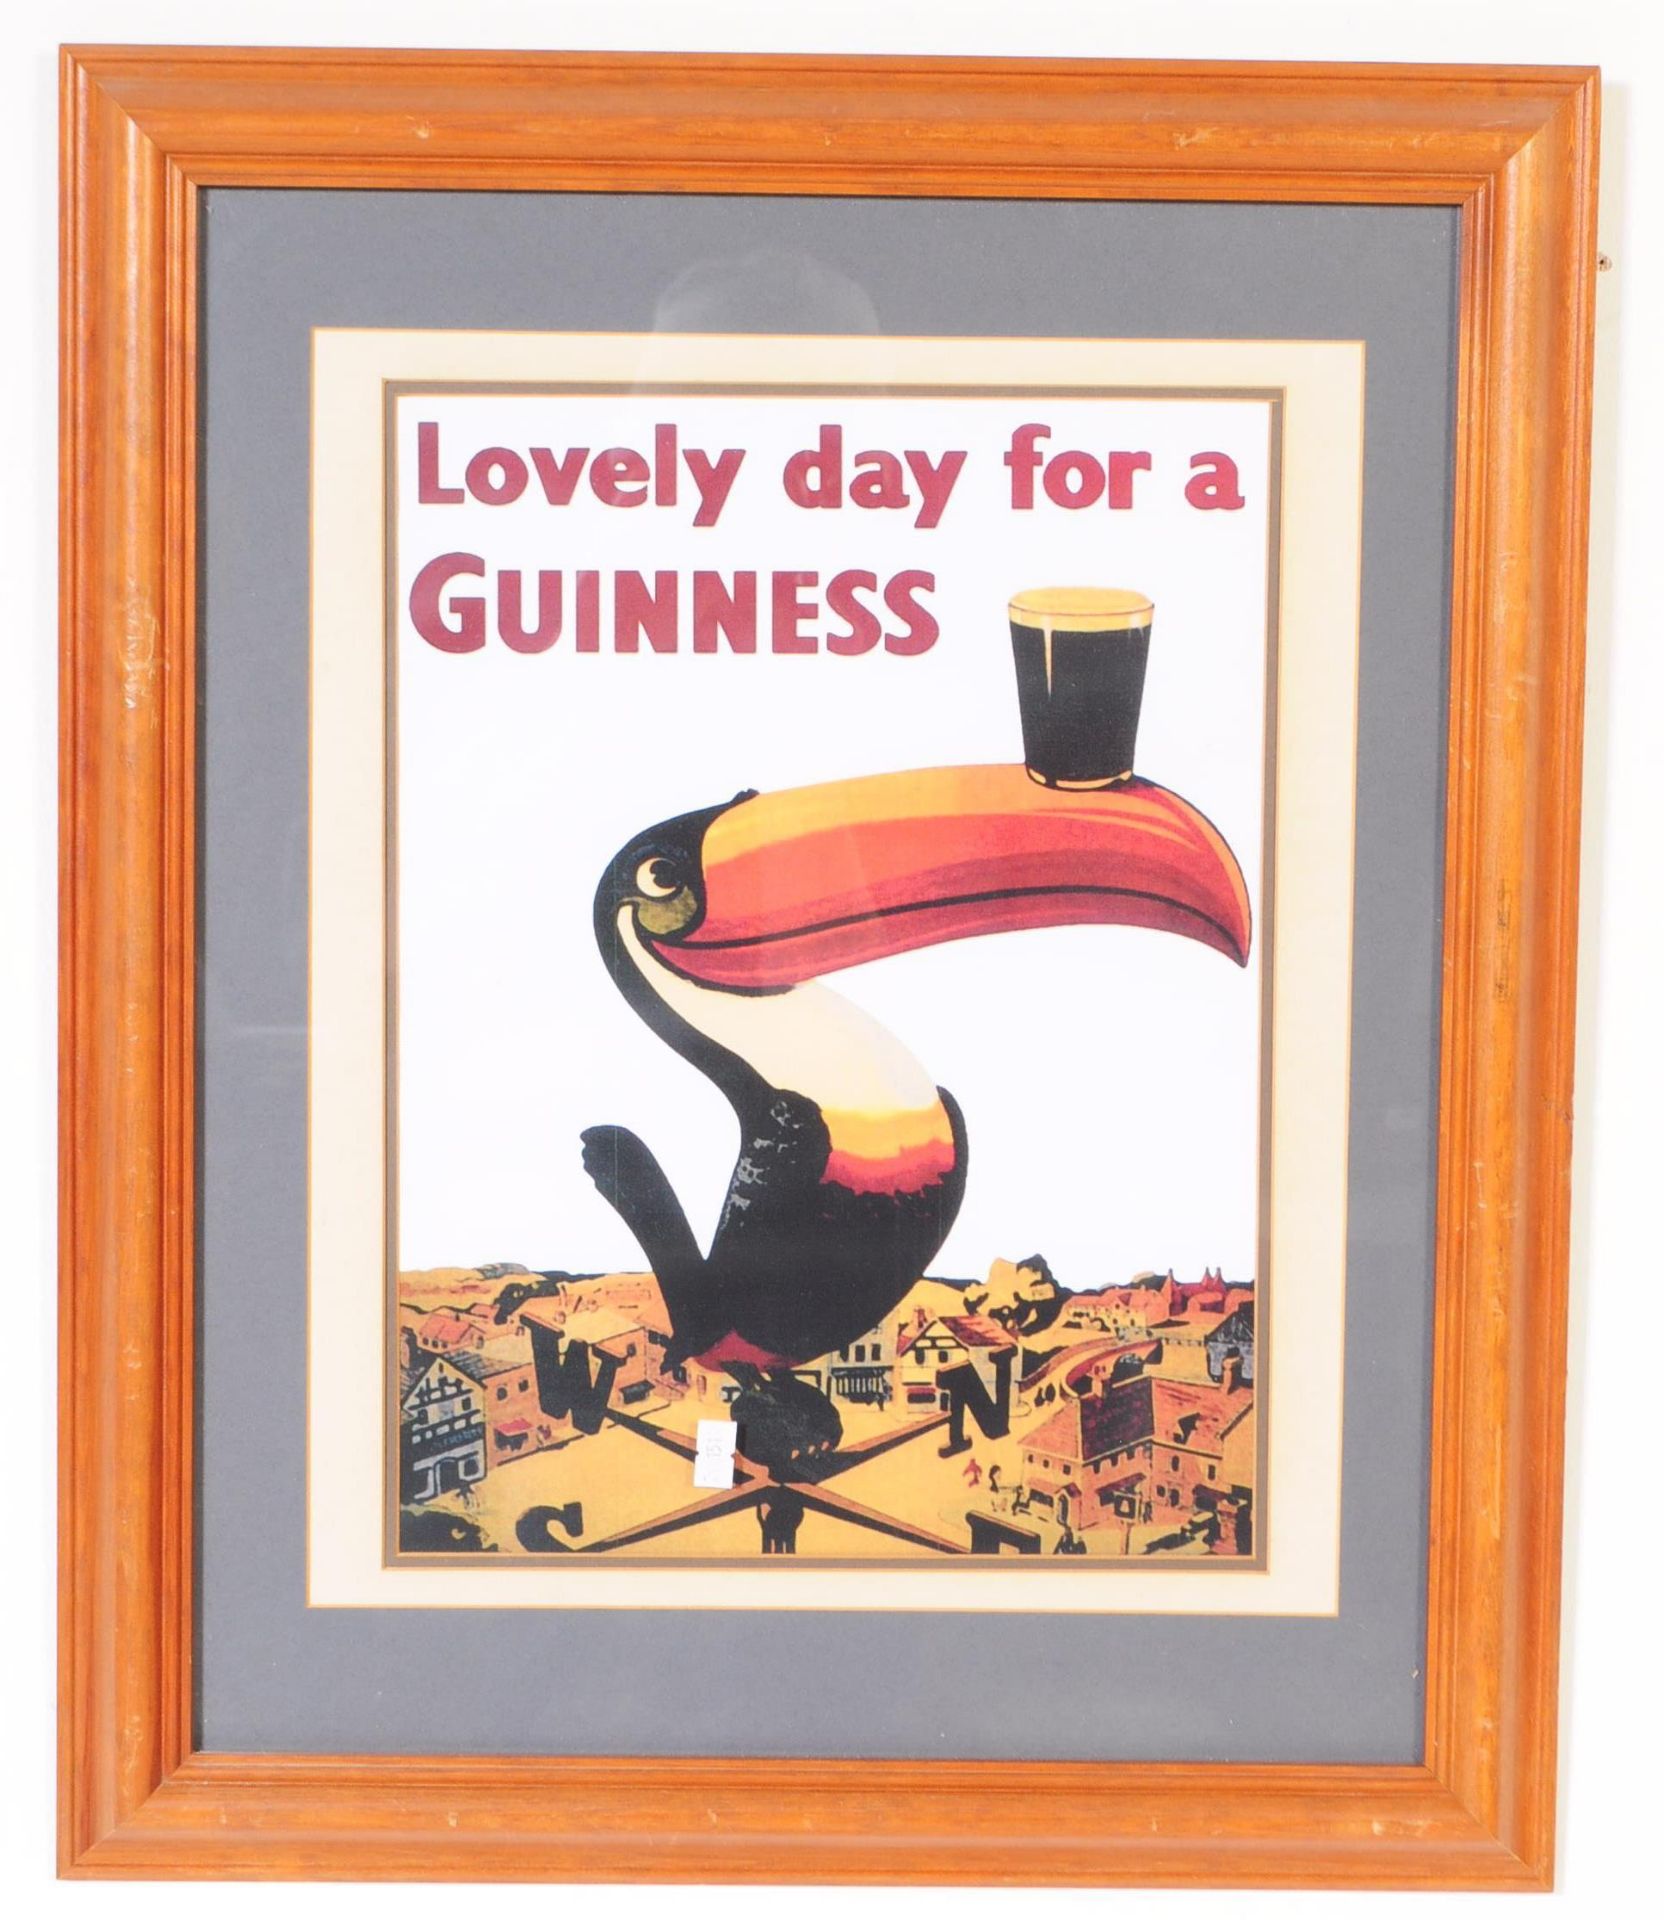 GUINNESS - COLLECTION OF REPRODUCTION ADVERTISING PRINTS - Image 2 of 5